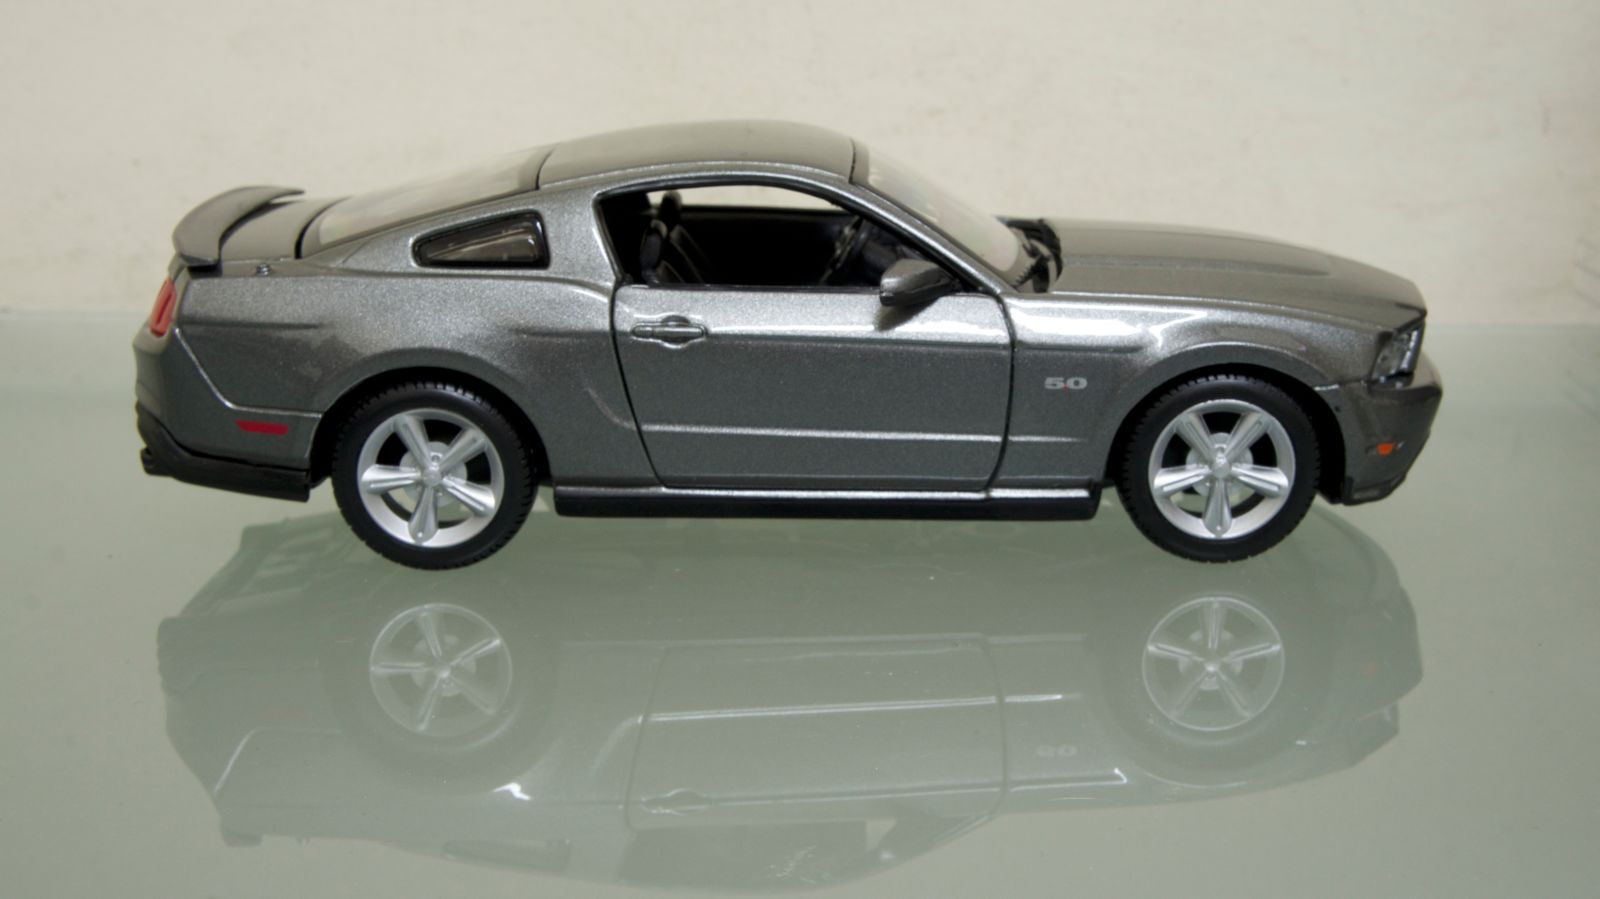 Illustration for article titled Maisto 1:24 2011 Ford Mustang GT